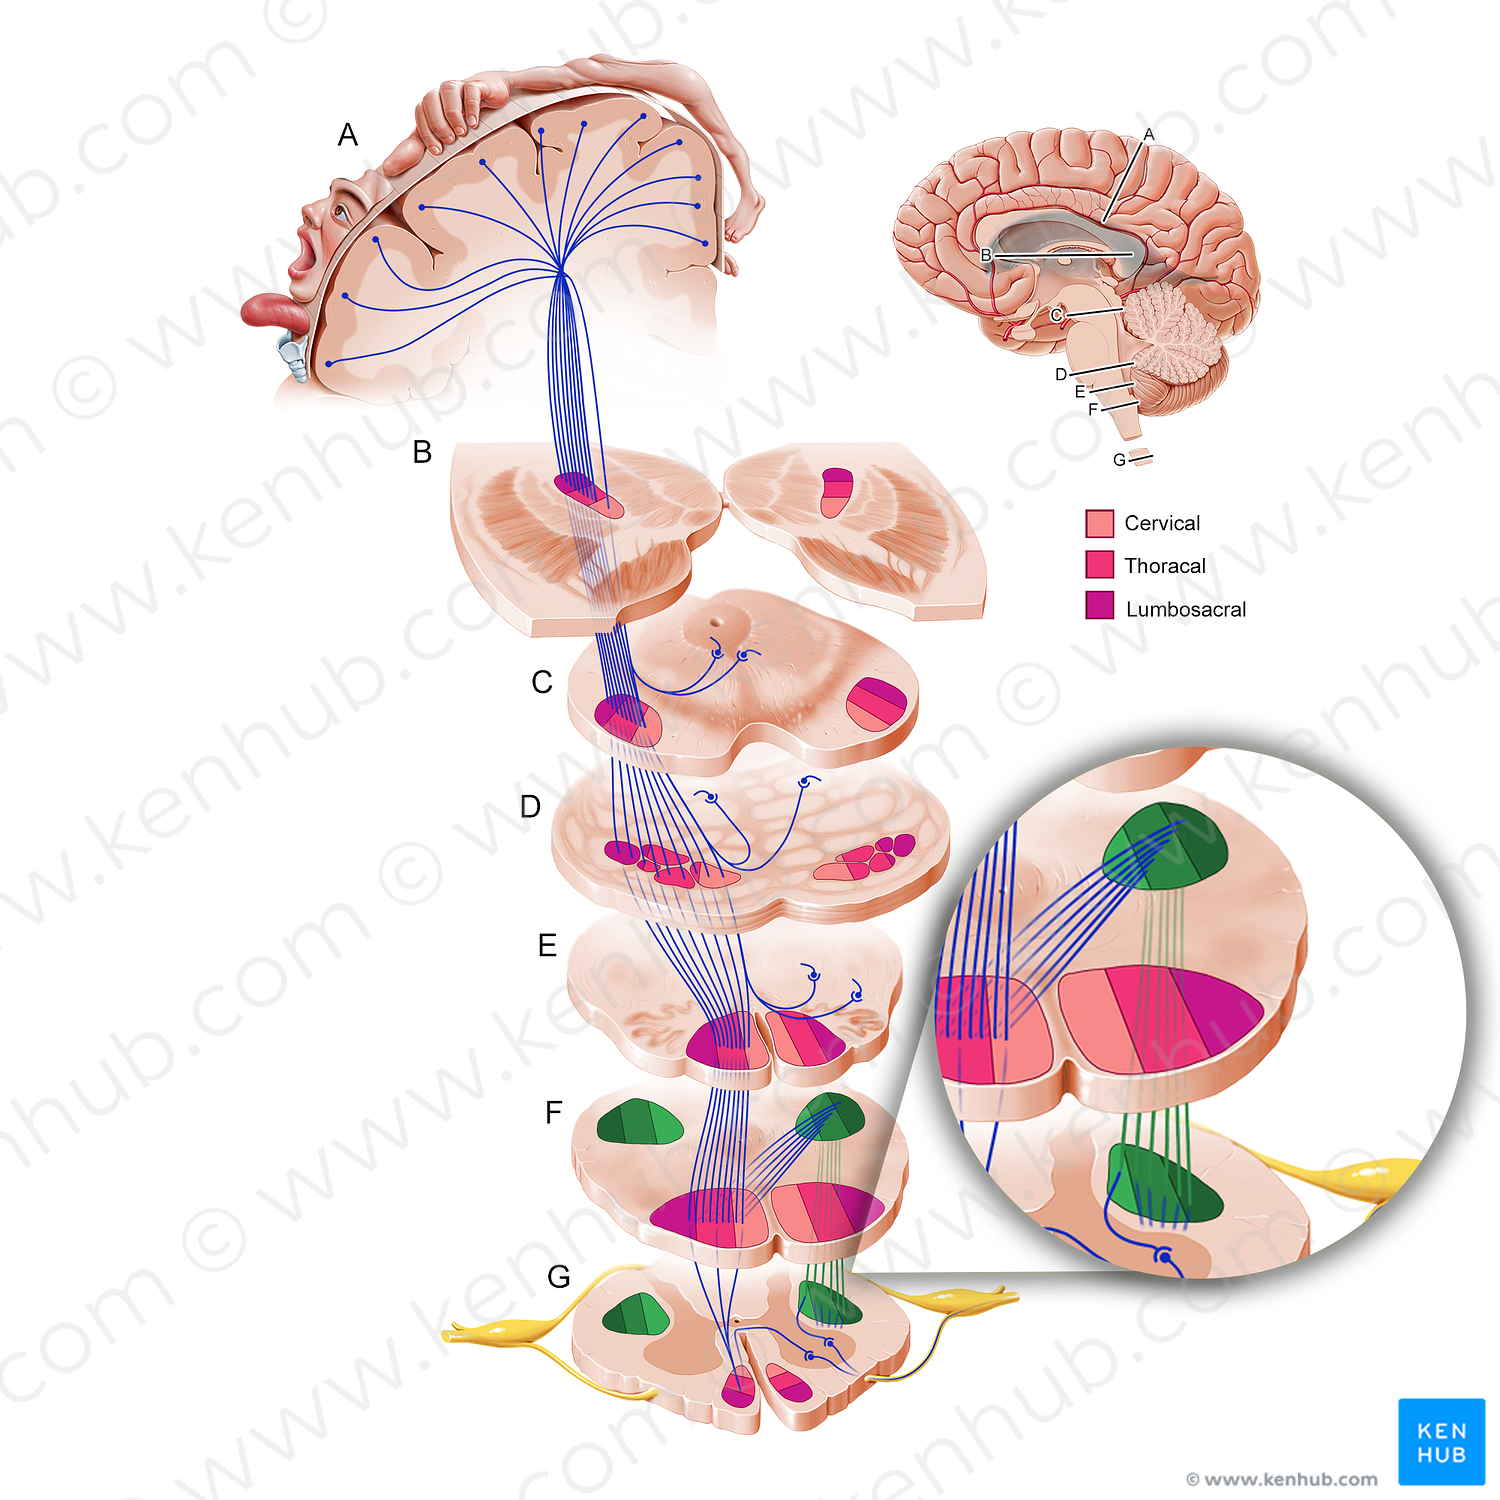 Lateral corticospinal tract (#11214)